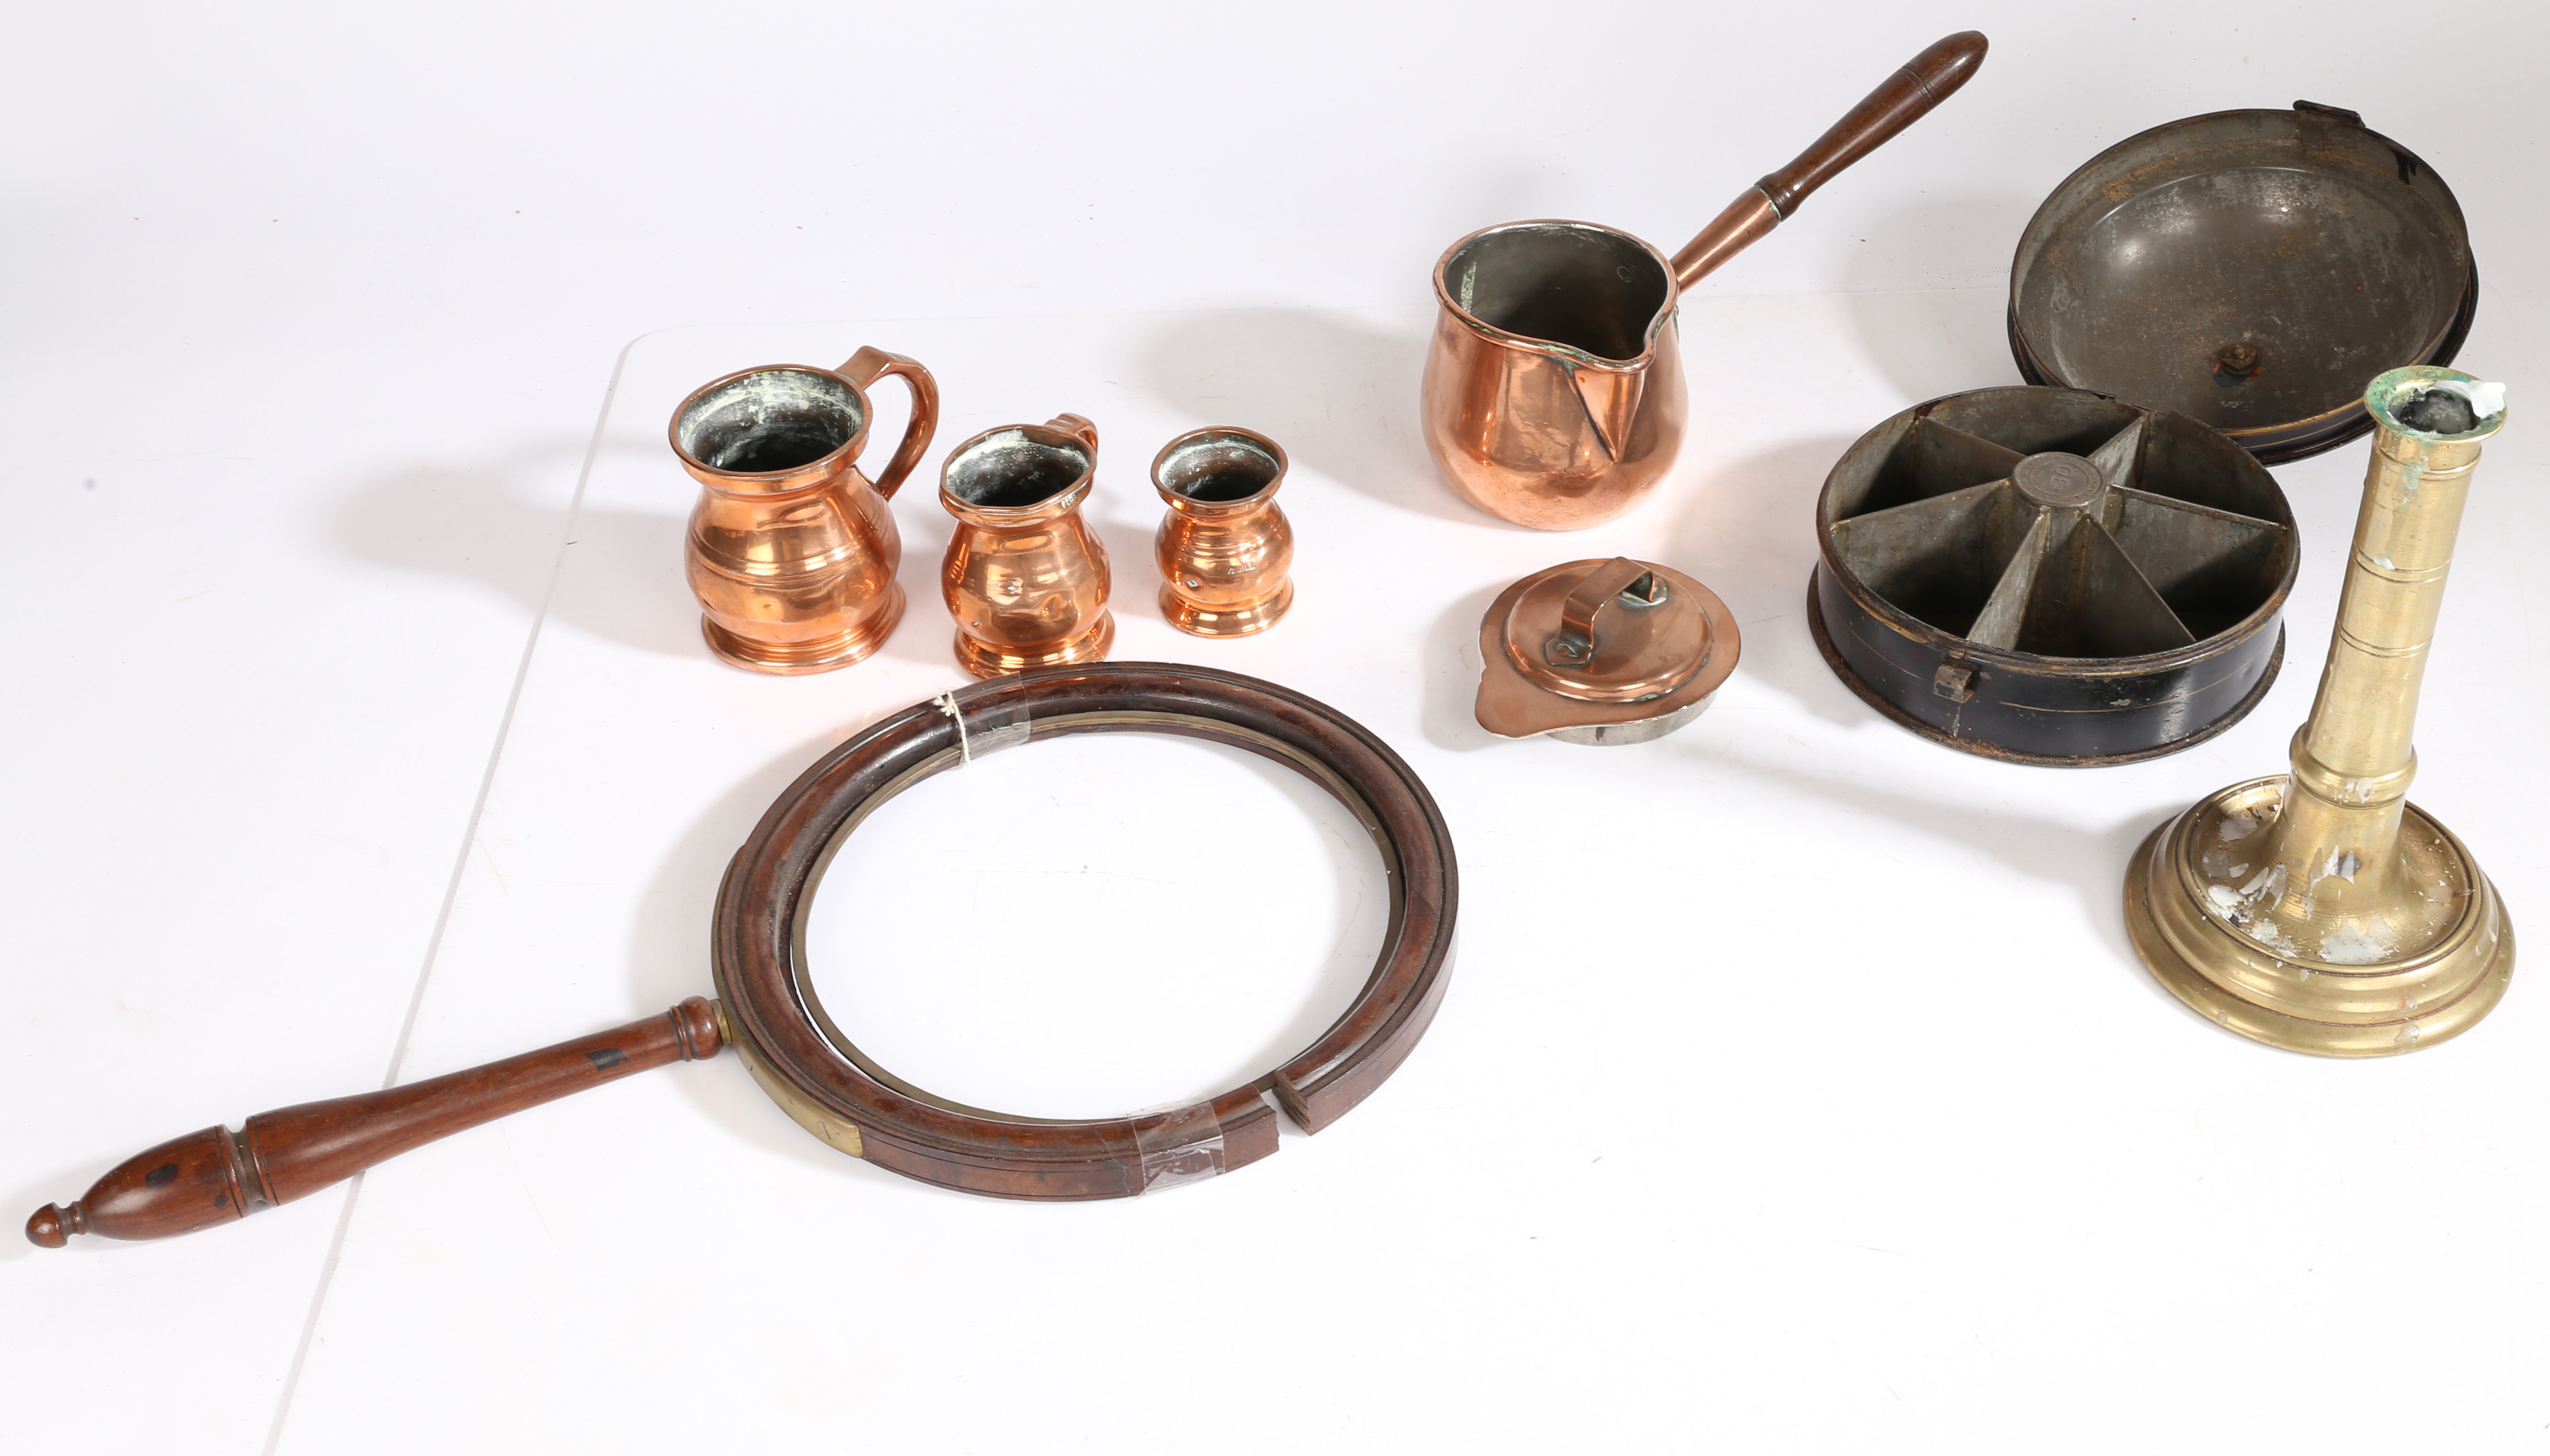 A collection of 19th Century and earlier metalware, to include a candlestick, three copper jugs, a